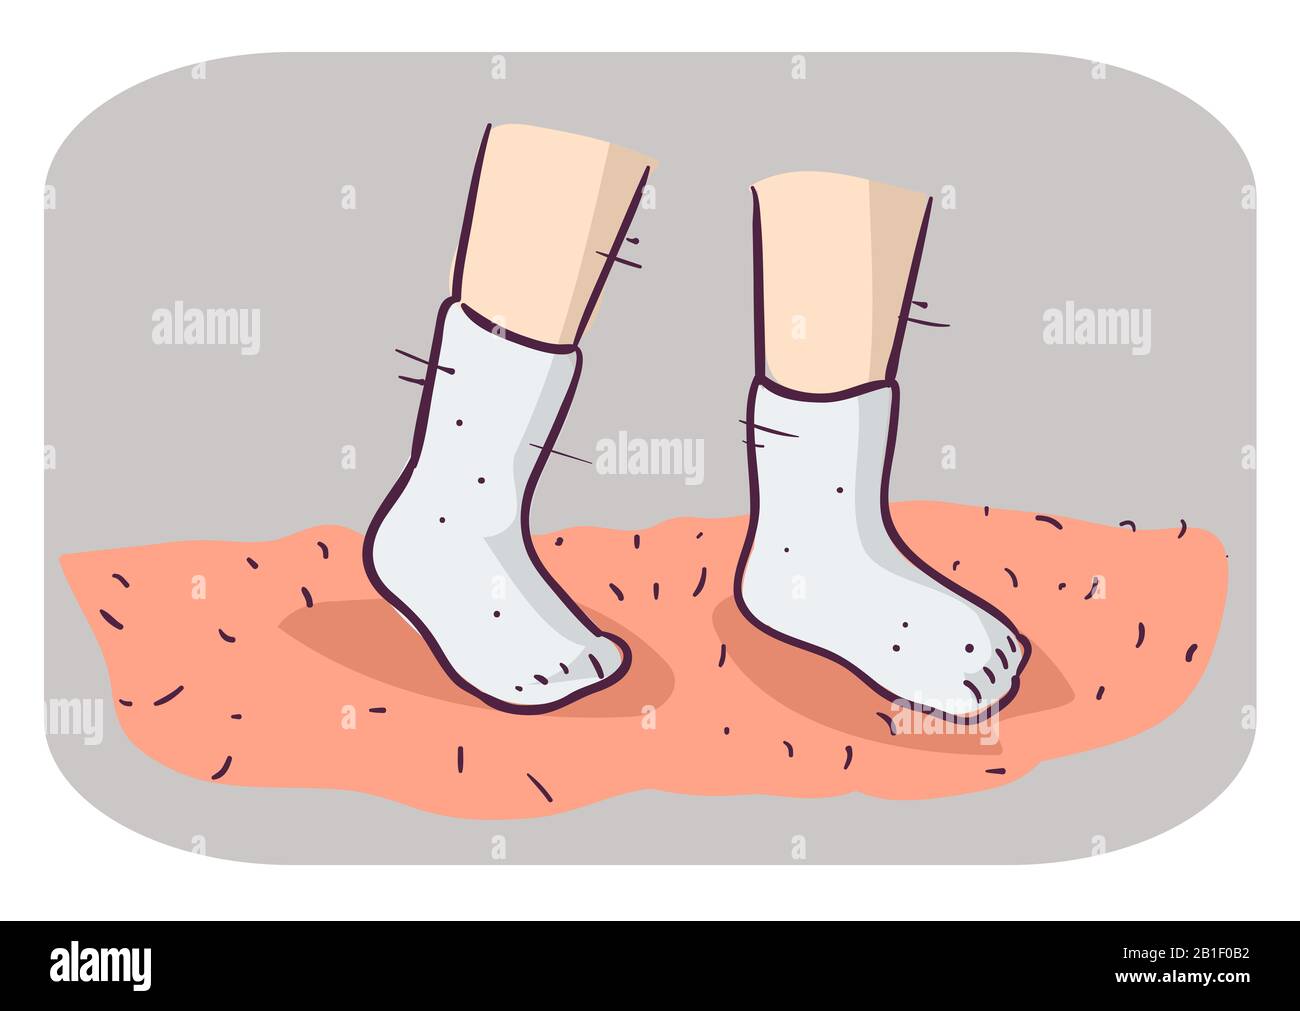 Illustration of a Persons Feet Wearing White Socks Walking on Carpet Flooring for Checking for Fleas Stock Photo